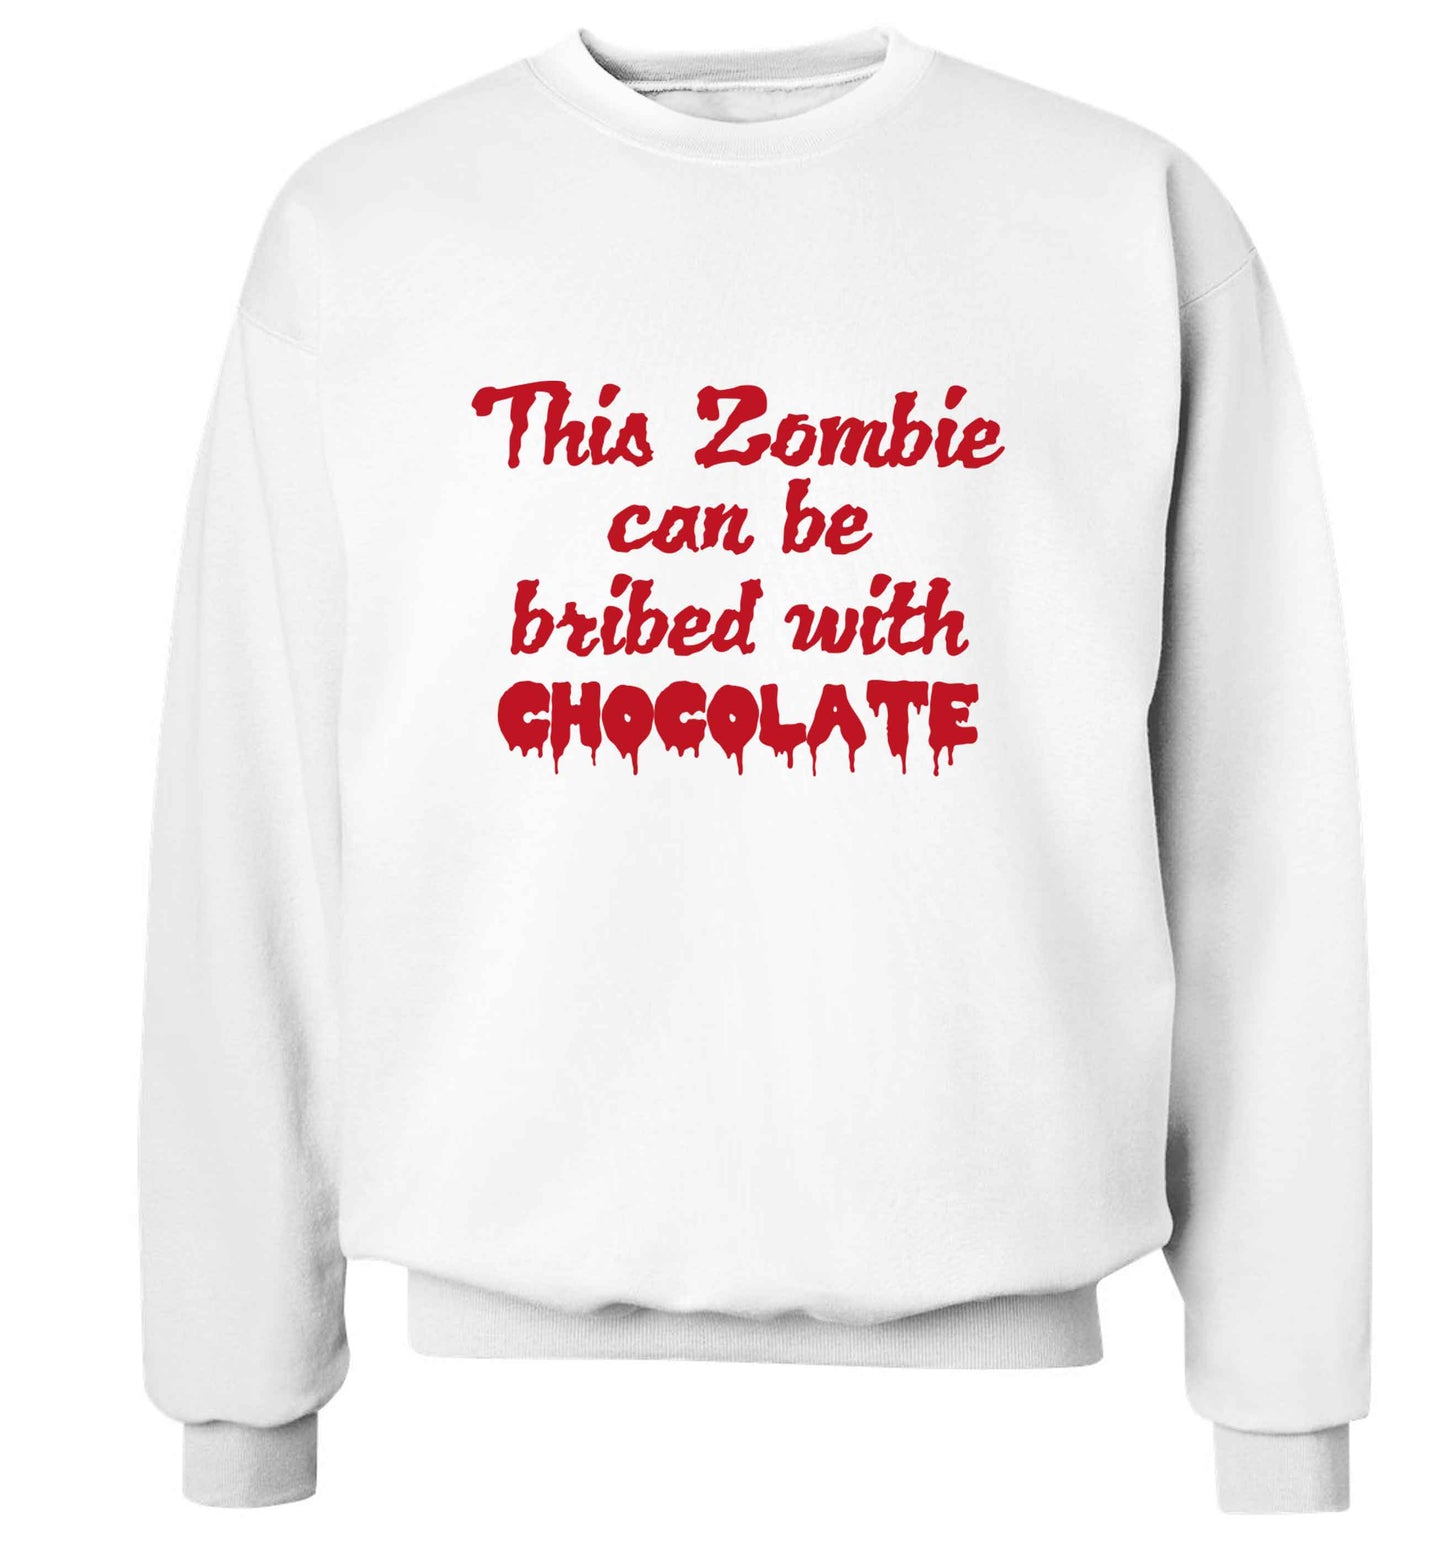 This zombie can be bribed with chocolate adult's unisex white sweater 2XL